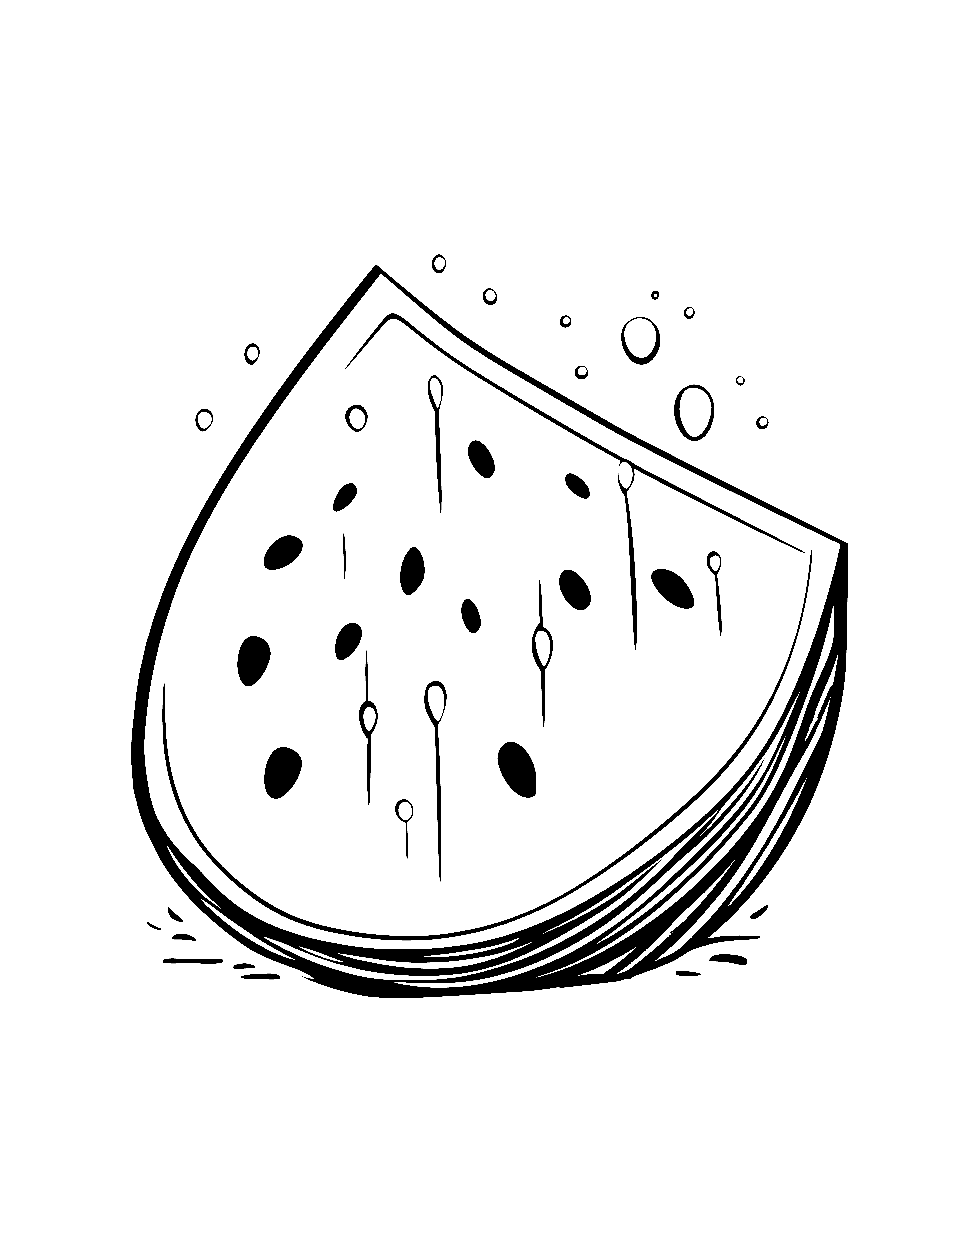 Summer Watermelon Food Coloring Page - A juicy watermelon slice for the maximum refreshment in summer.